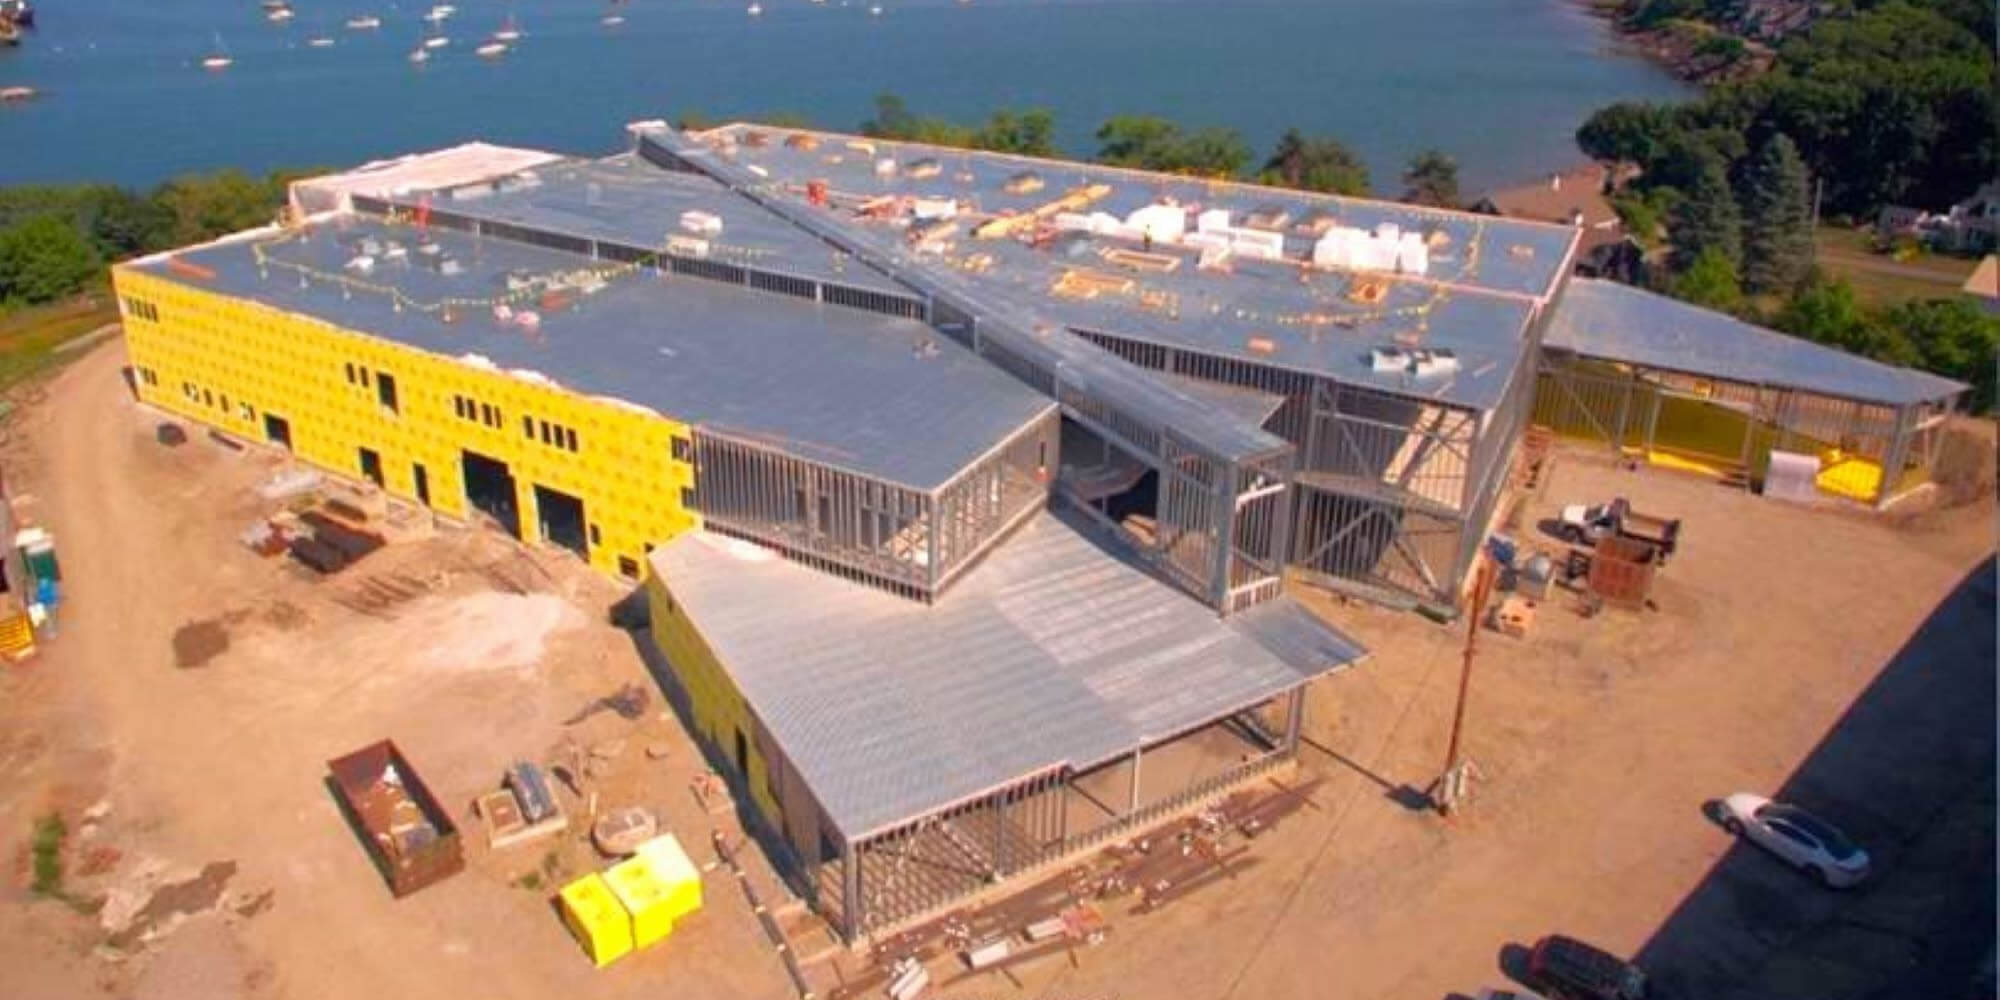 Conventional steel building for Mid-Coast School of Technology under construction.